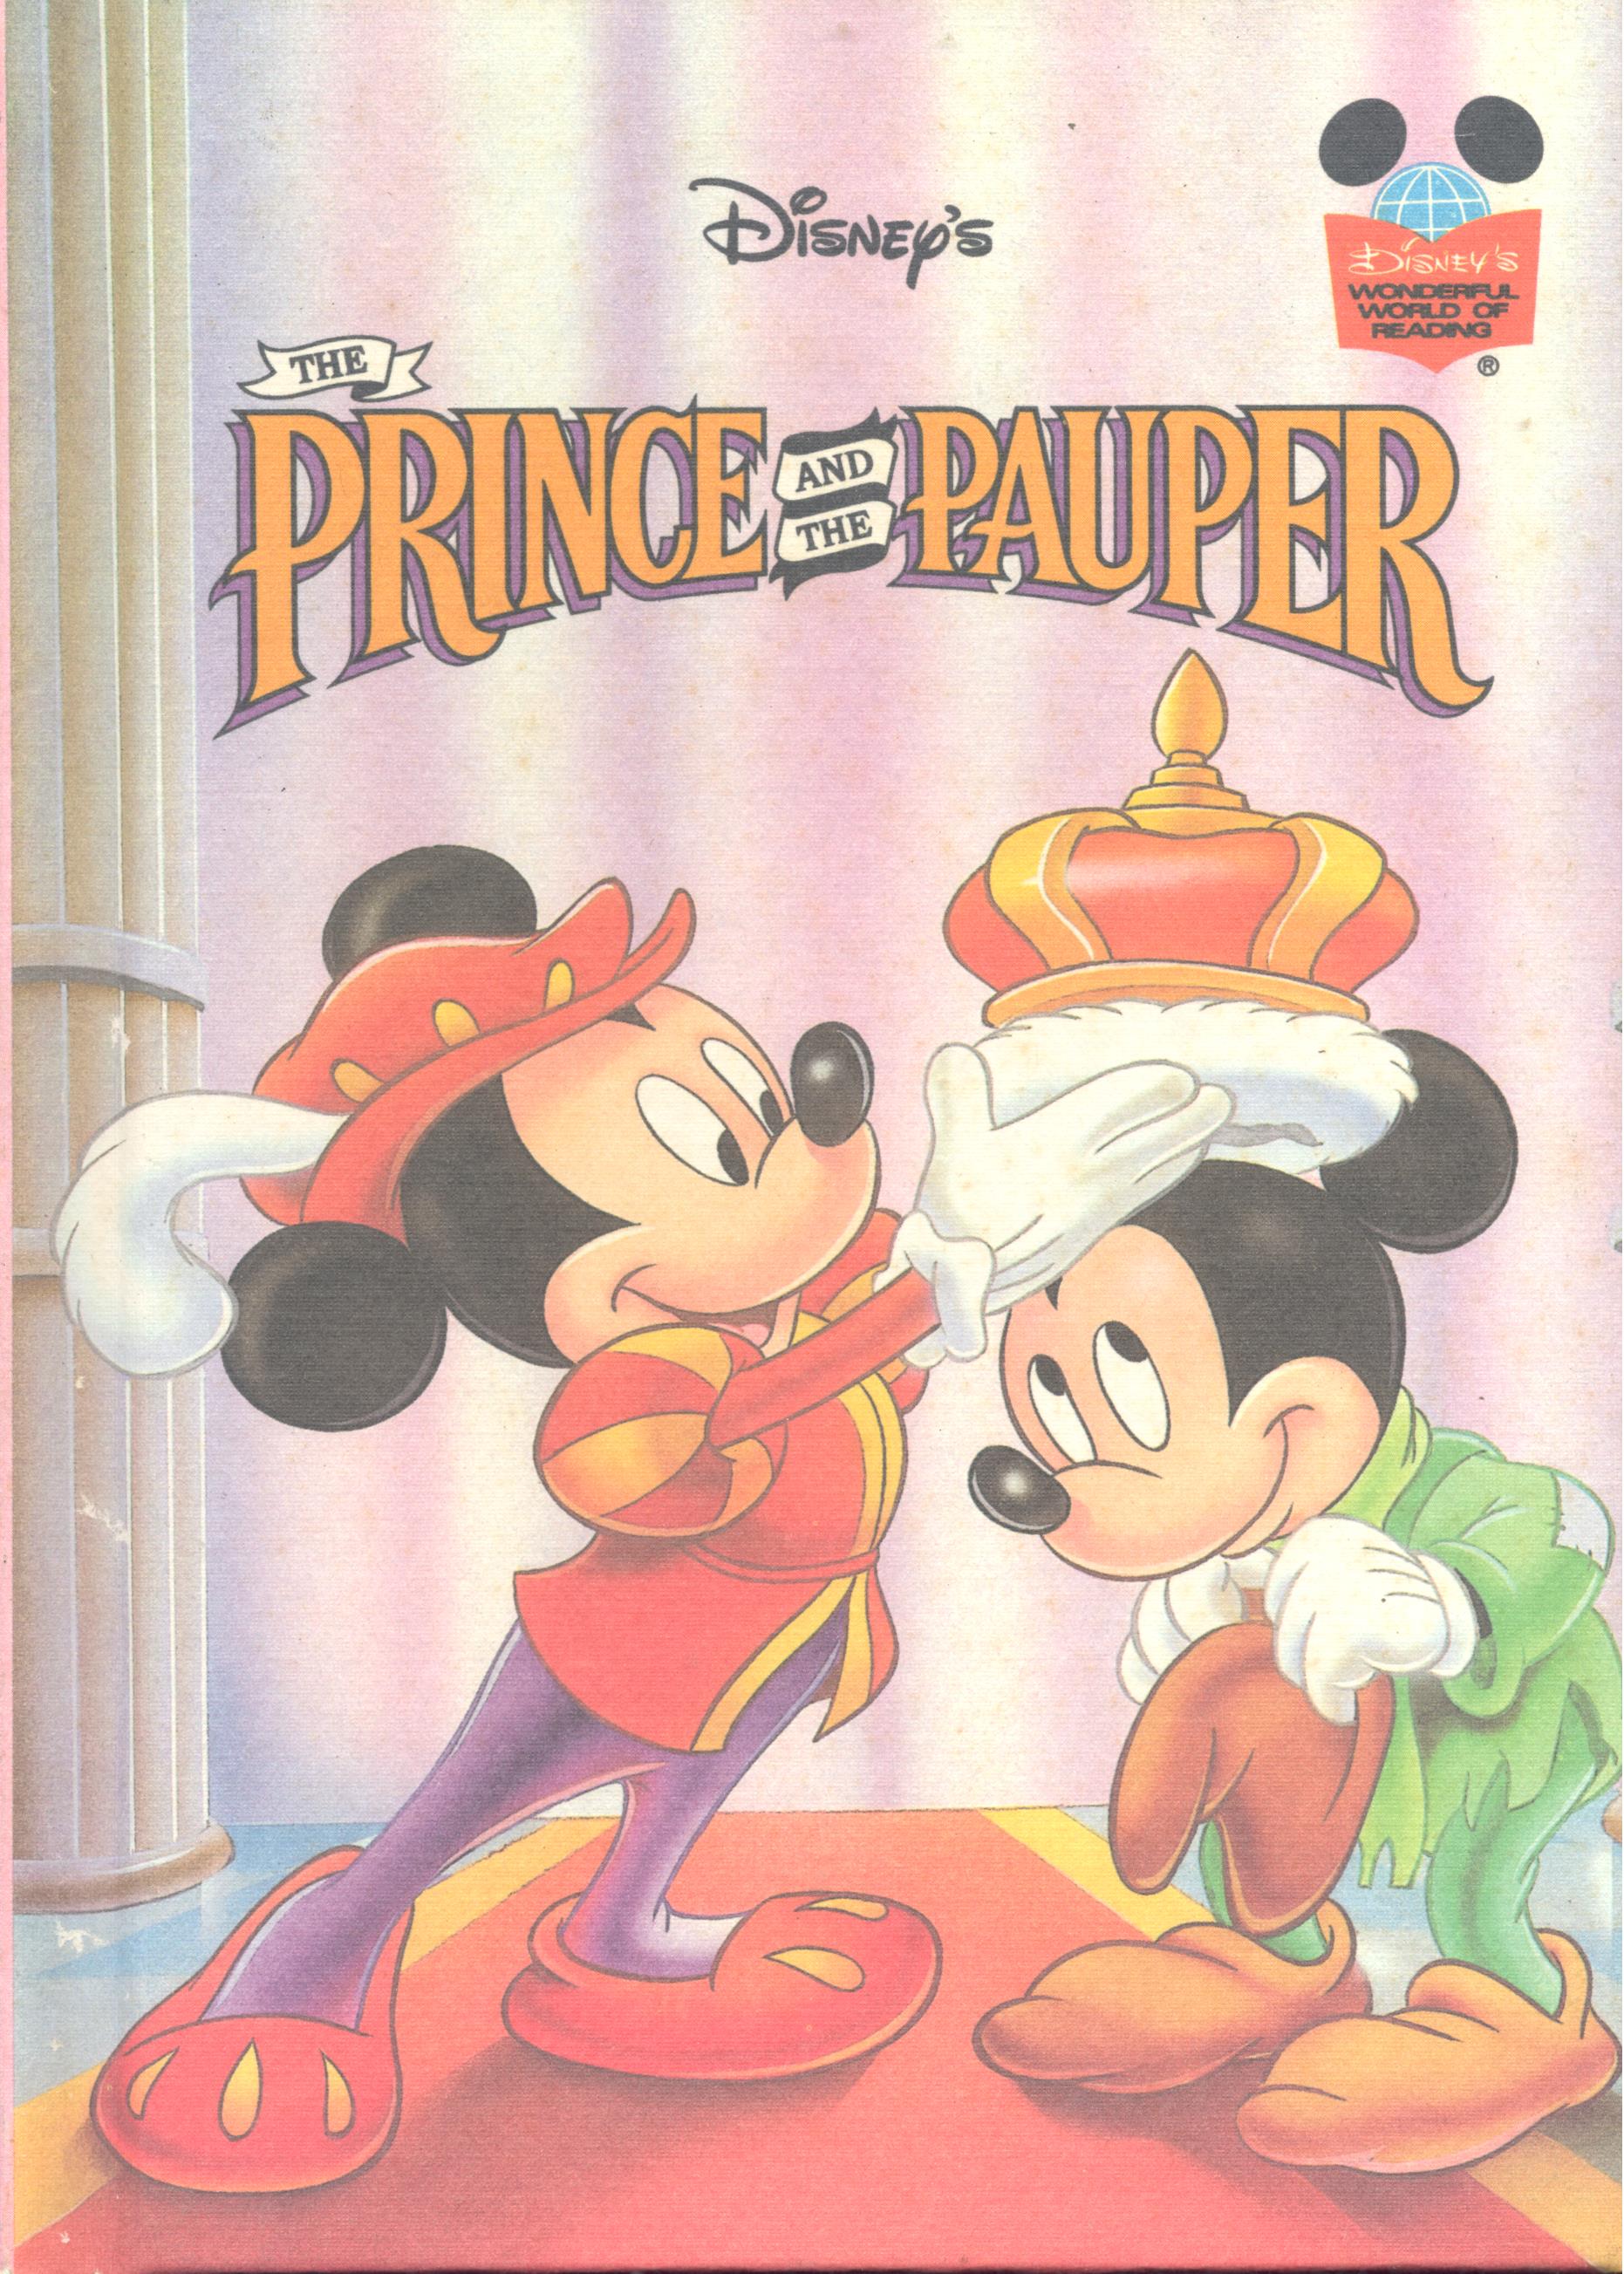 Walt Disney' s the prince and the pauper.